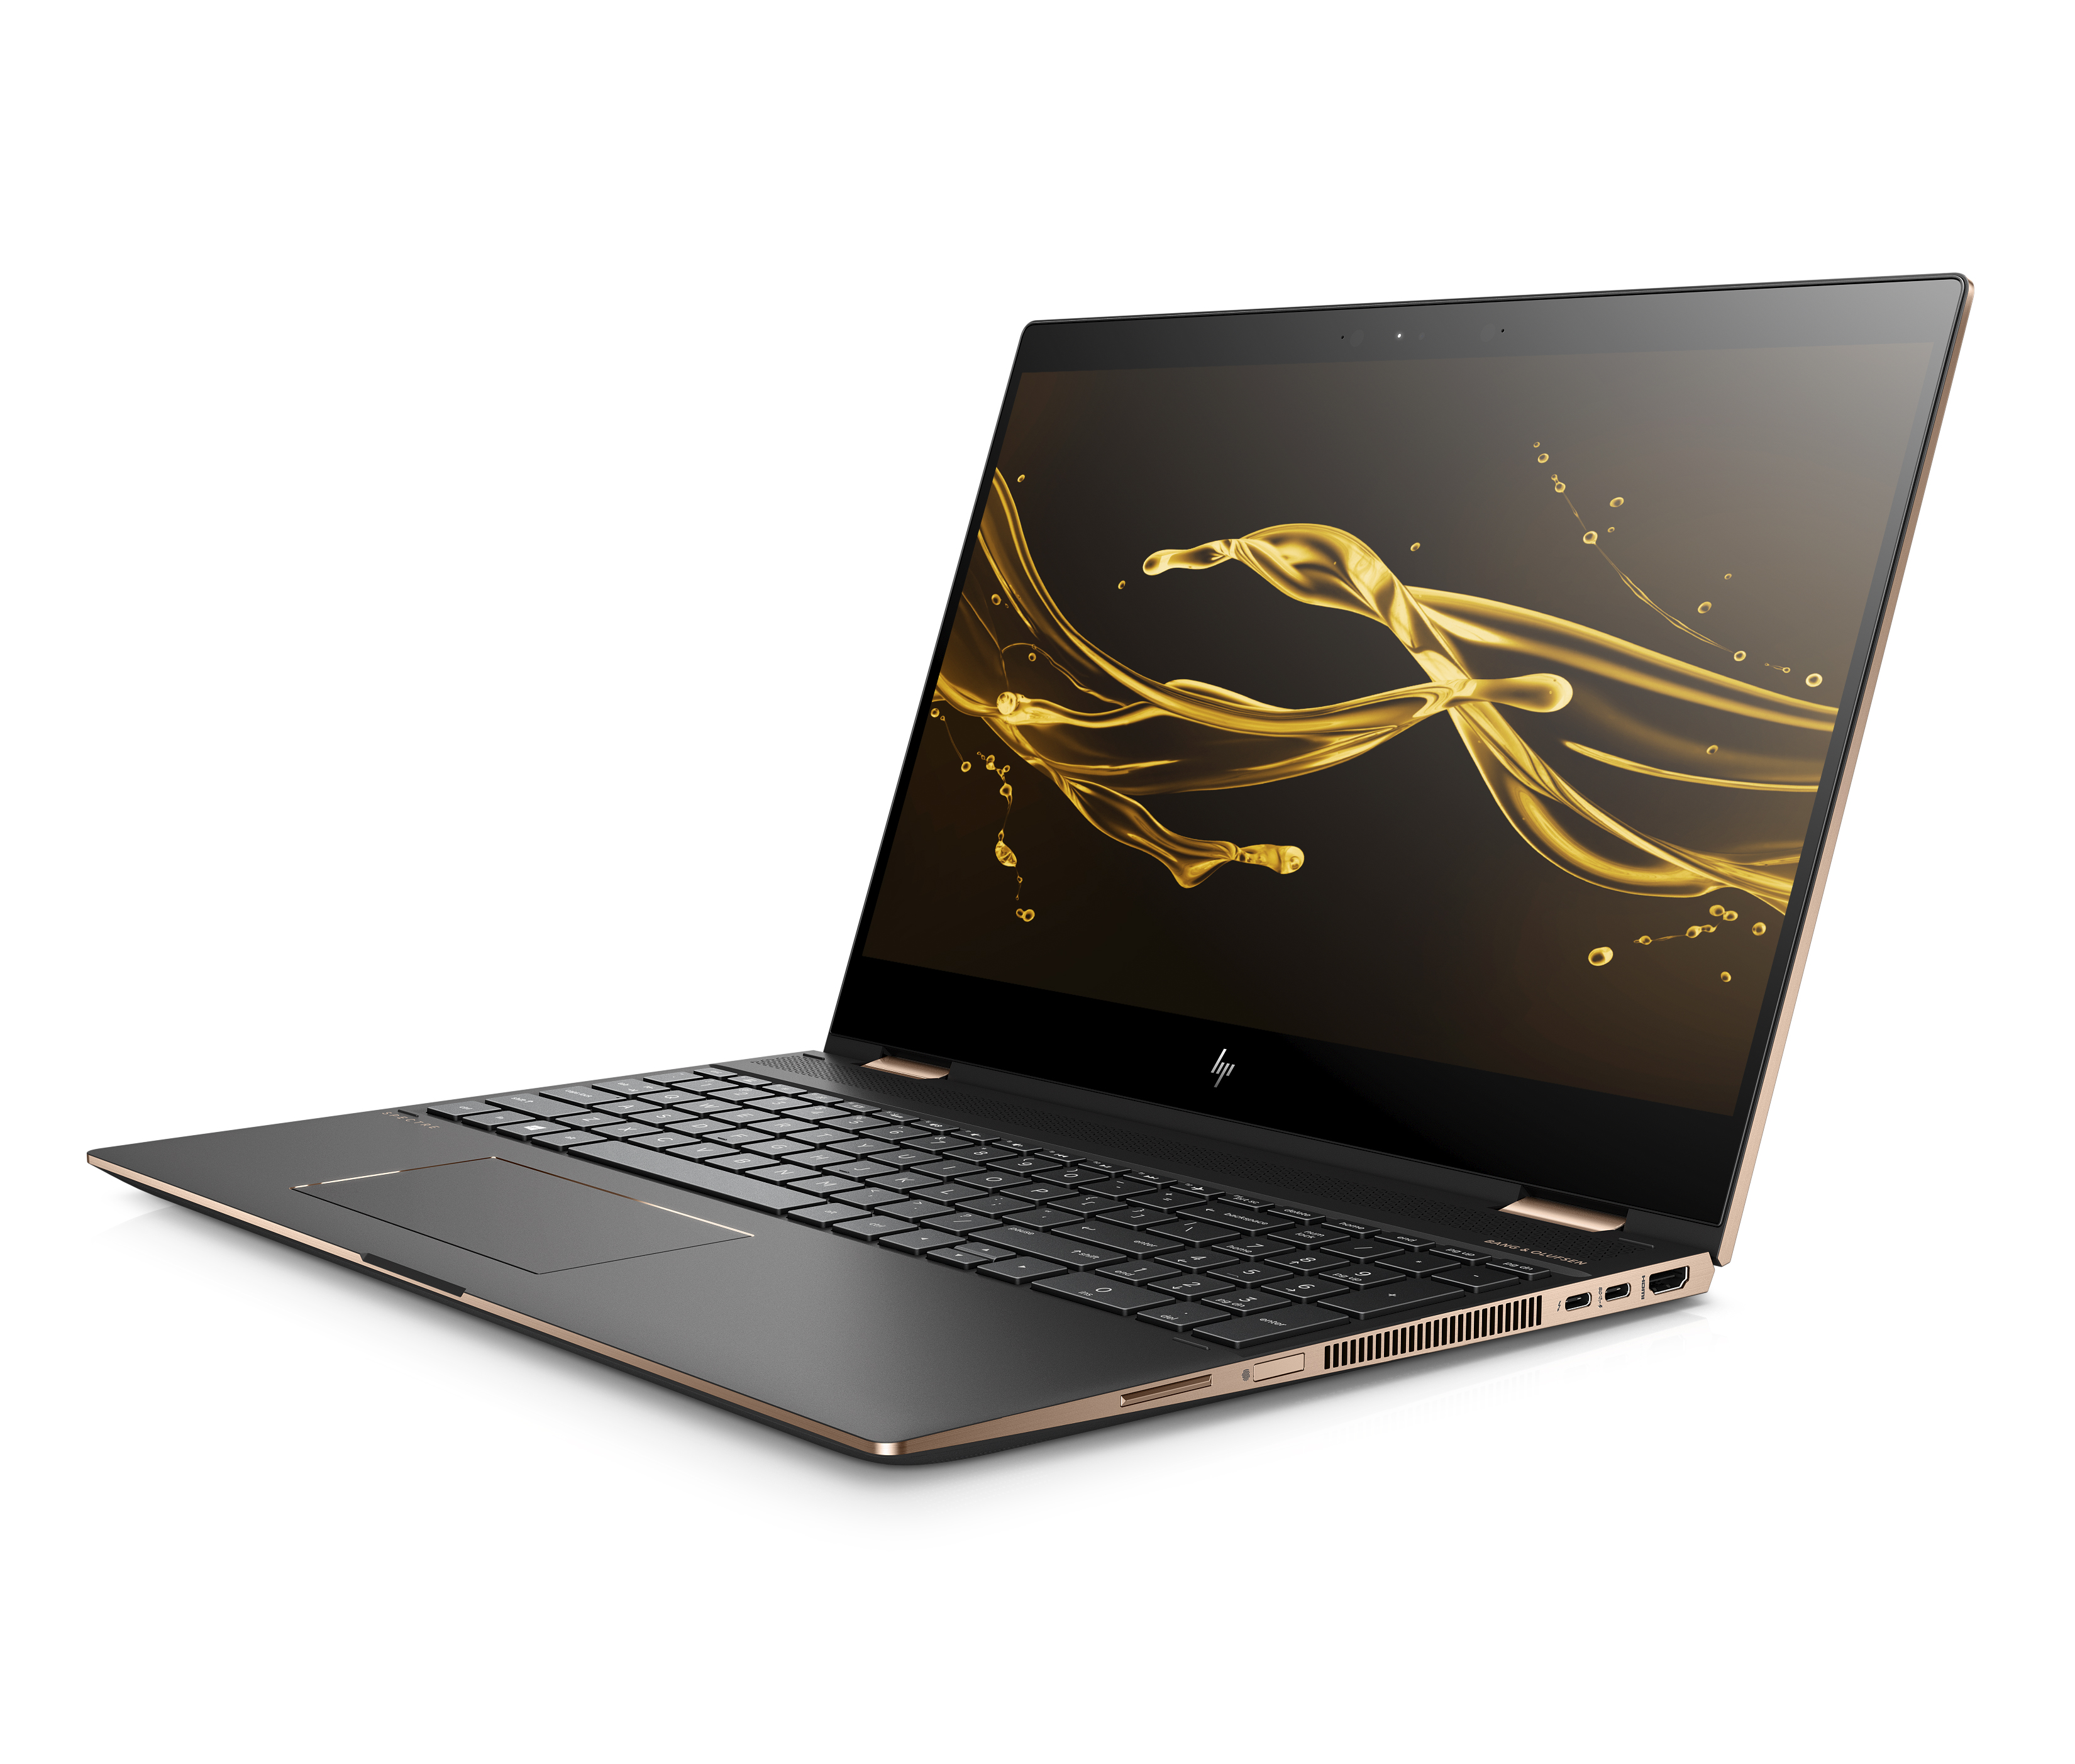 HP Spectre x360 15t (2018) product image